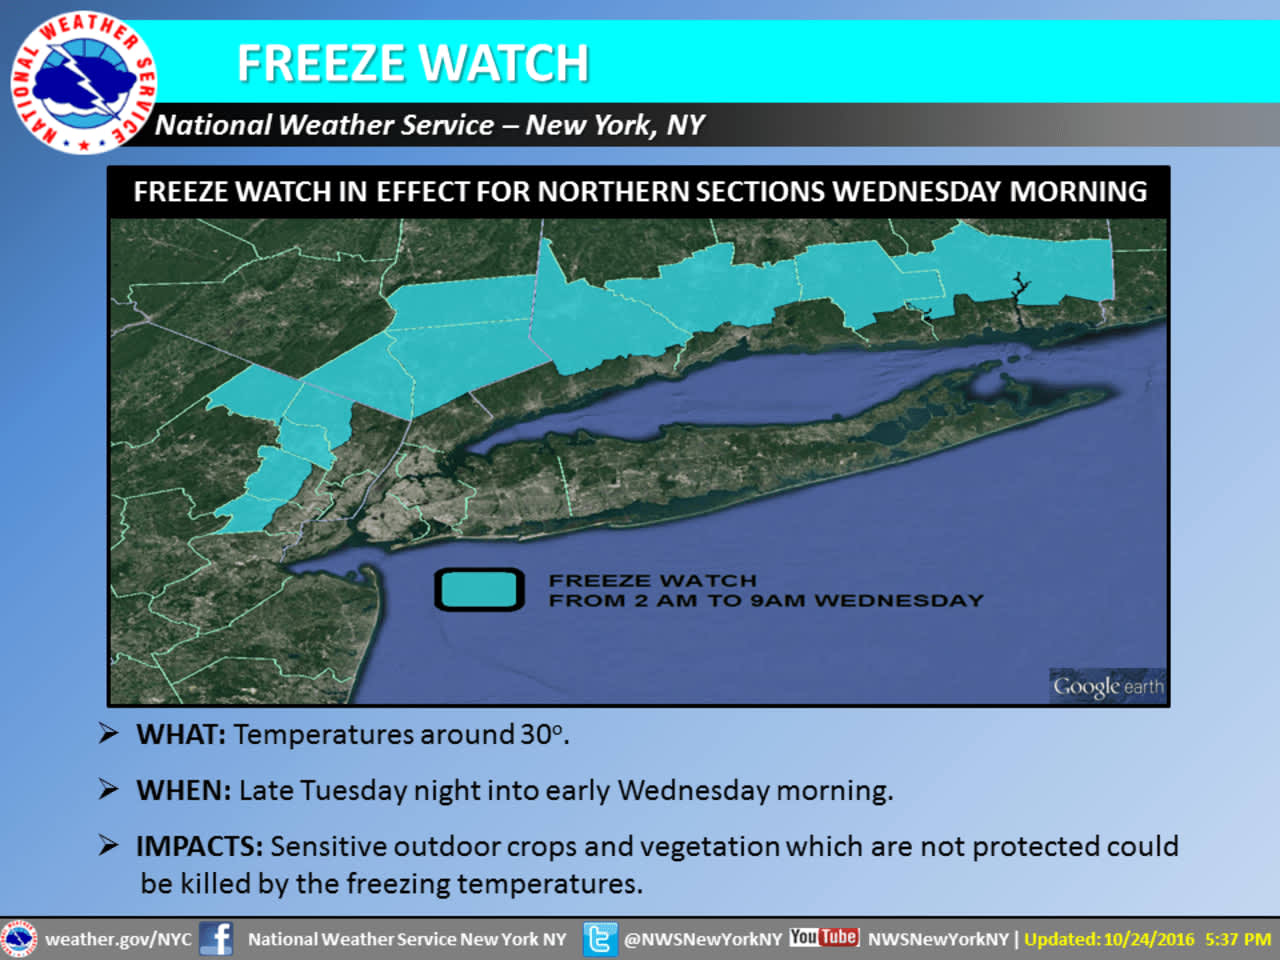 A look at counties covered by the Freeze Watch on Wednesday.